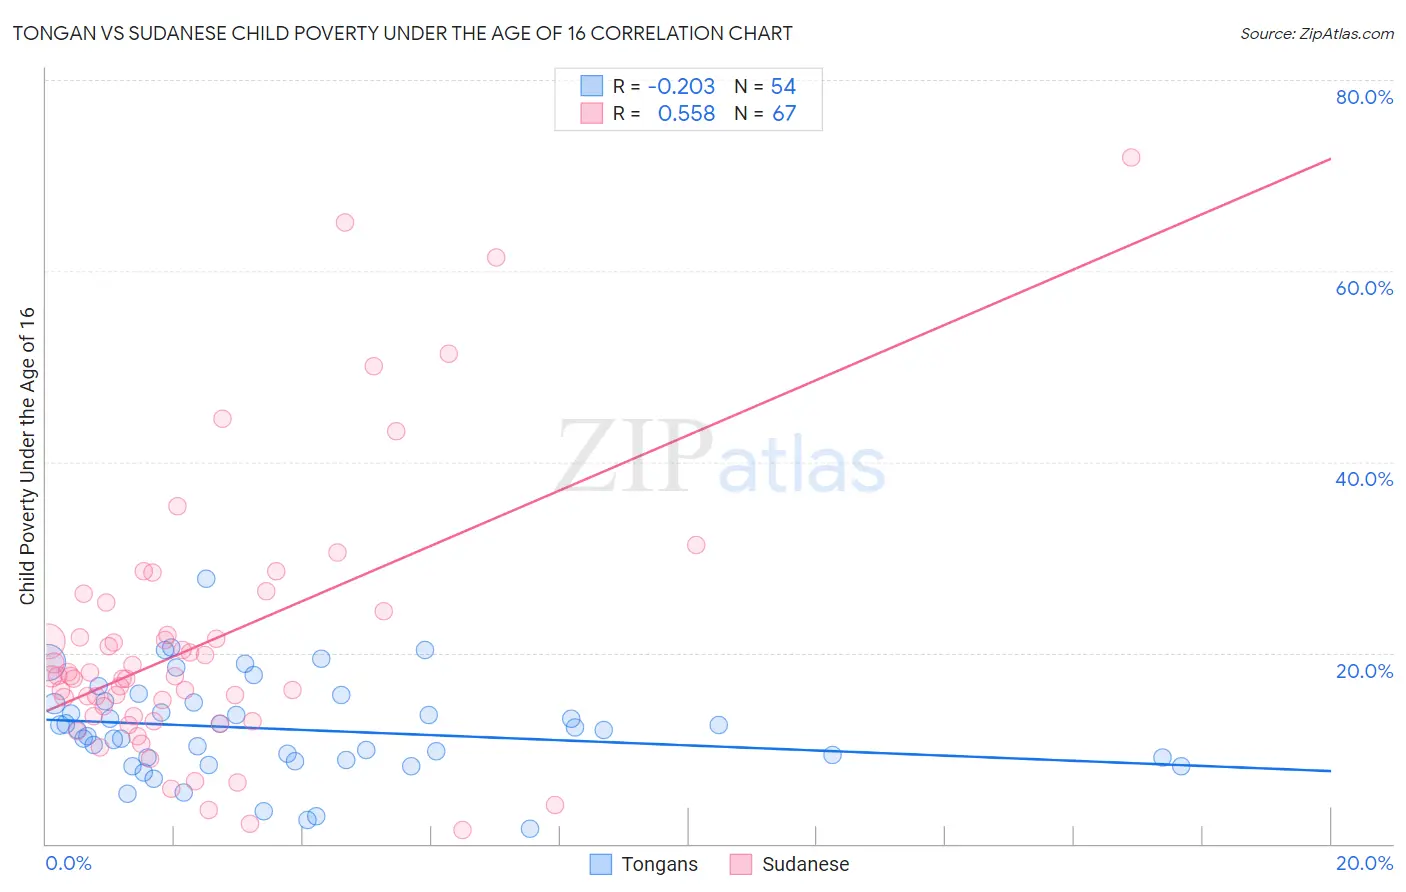 Tongan vs Sudanese Child Poverty Under the Age of 16